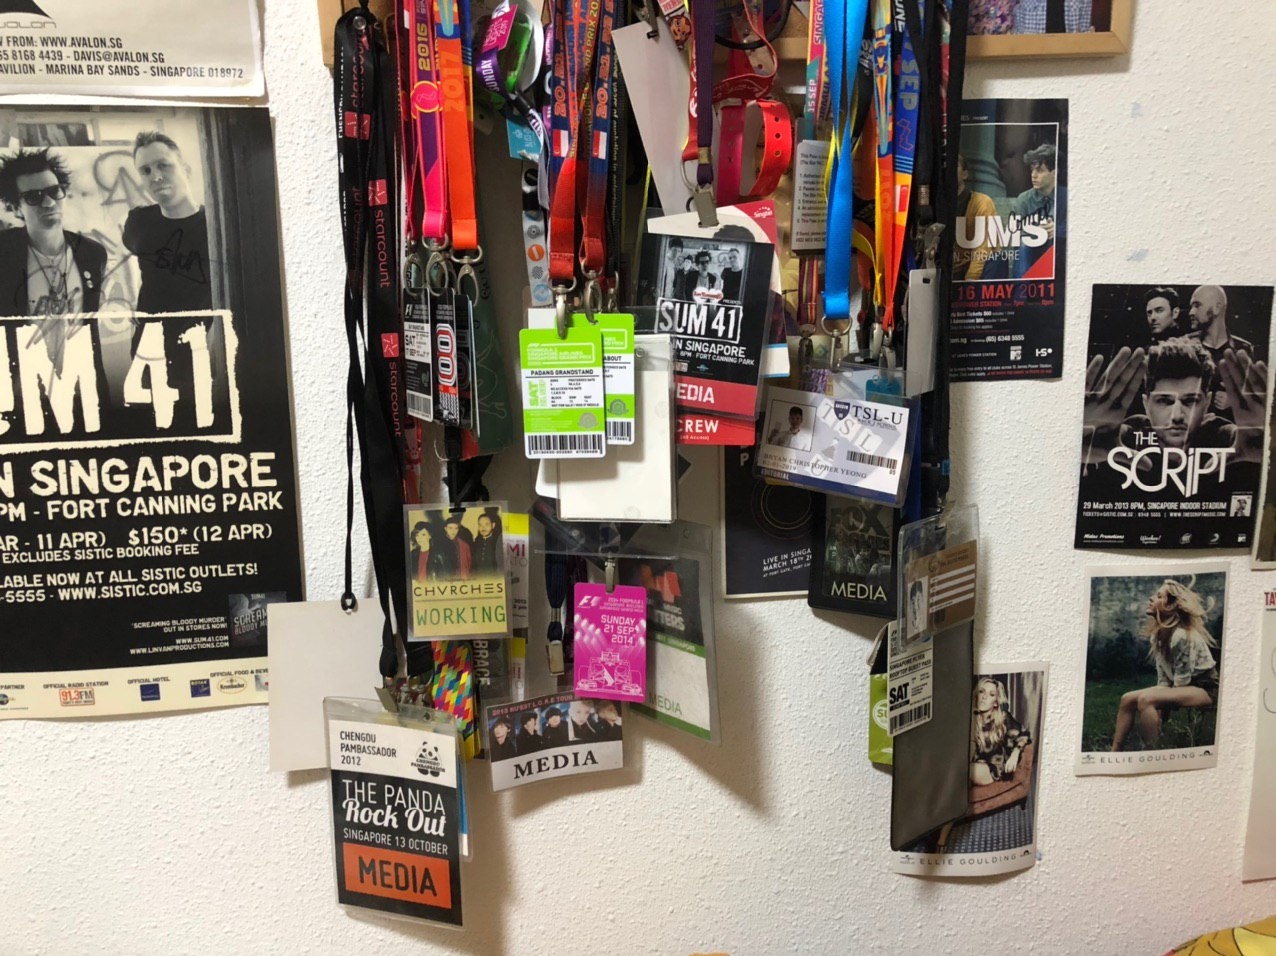 lanyards and wristtags